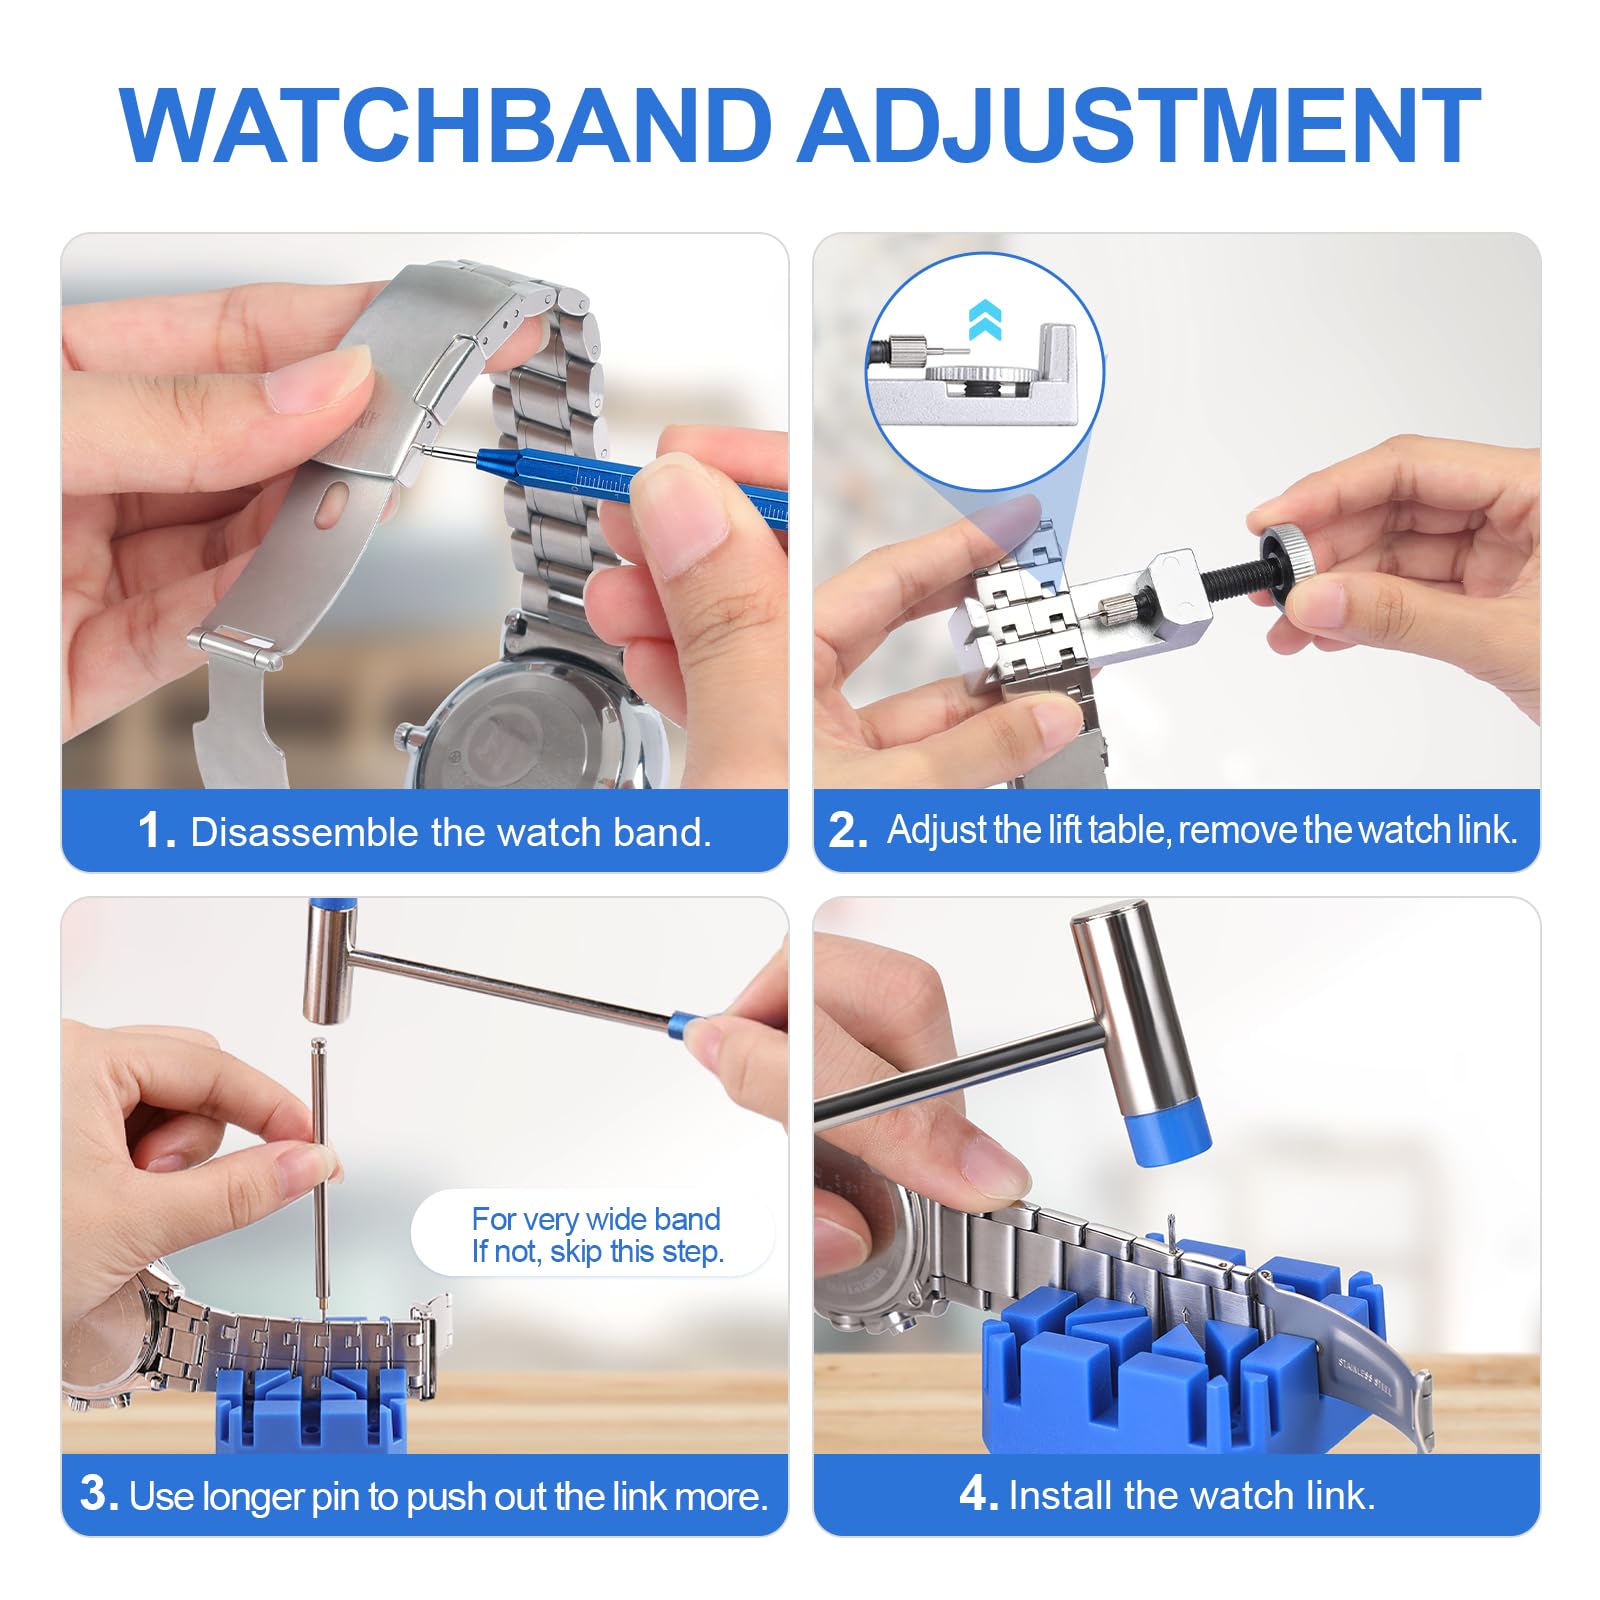 JOREST Watch Link Removal Tool Kit, Watch Band Tool for Watch Bracelet Adjustment, Repair, Replacement and Resizing, Watch Strap Link Remover, with 10 Spring Bars, 10 Pins, User Manual